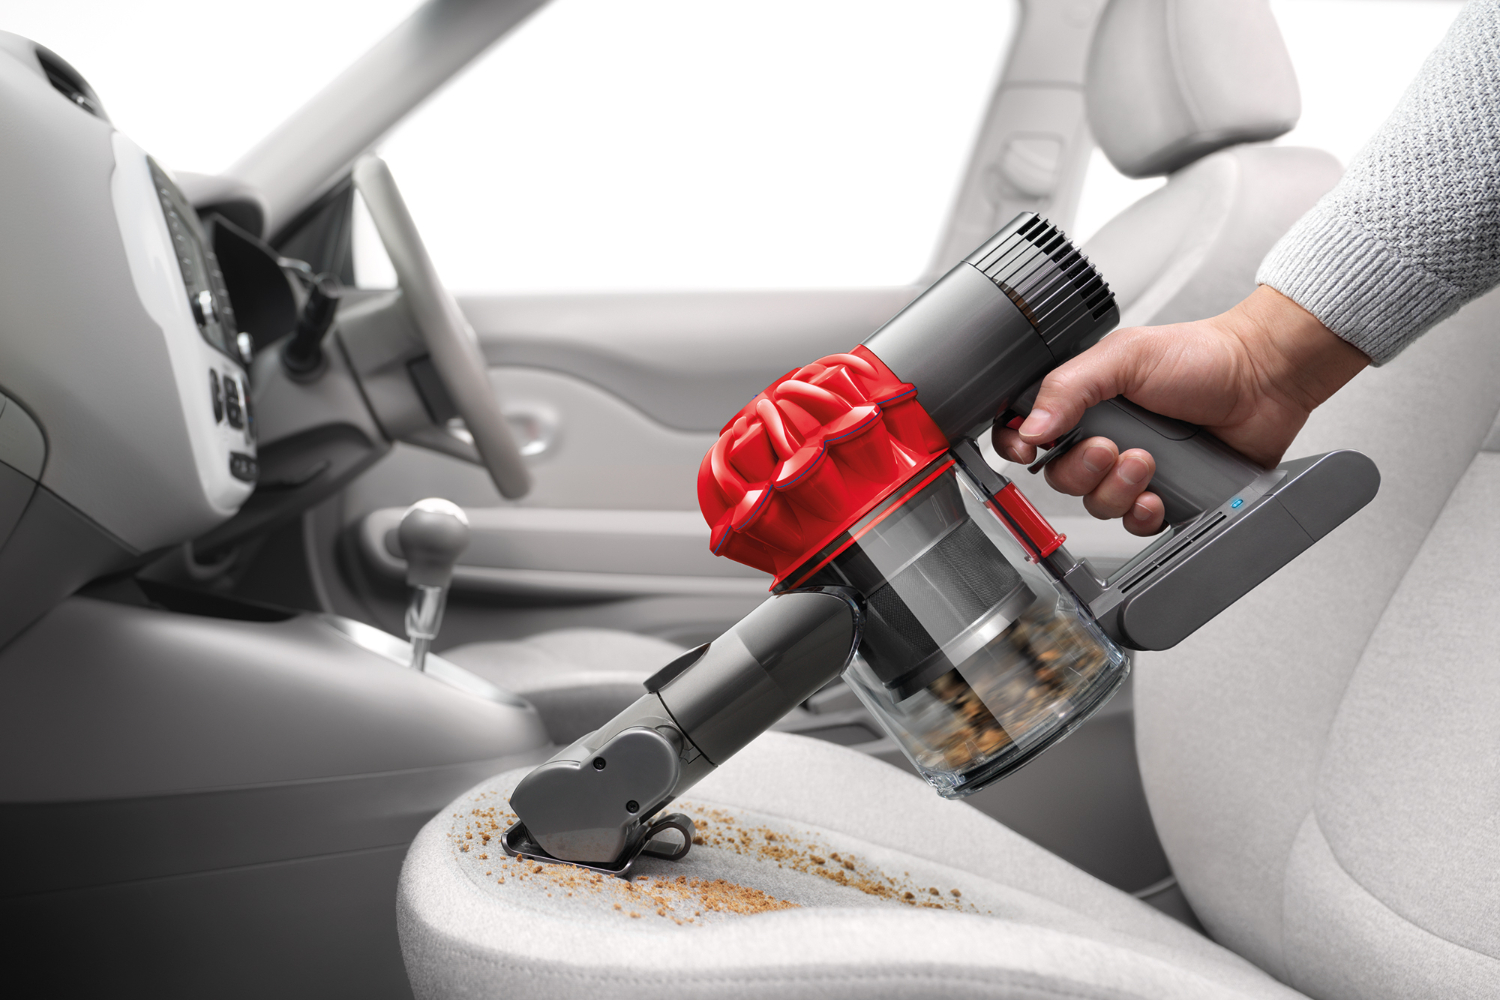 walmart knocks down prices on dyson handheld vacuums in post prime day sale v6 trigger vacuum car  boat 2